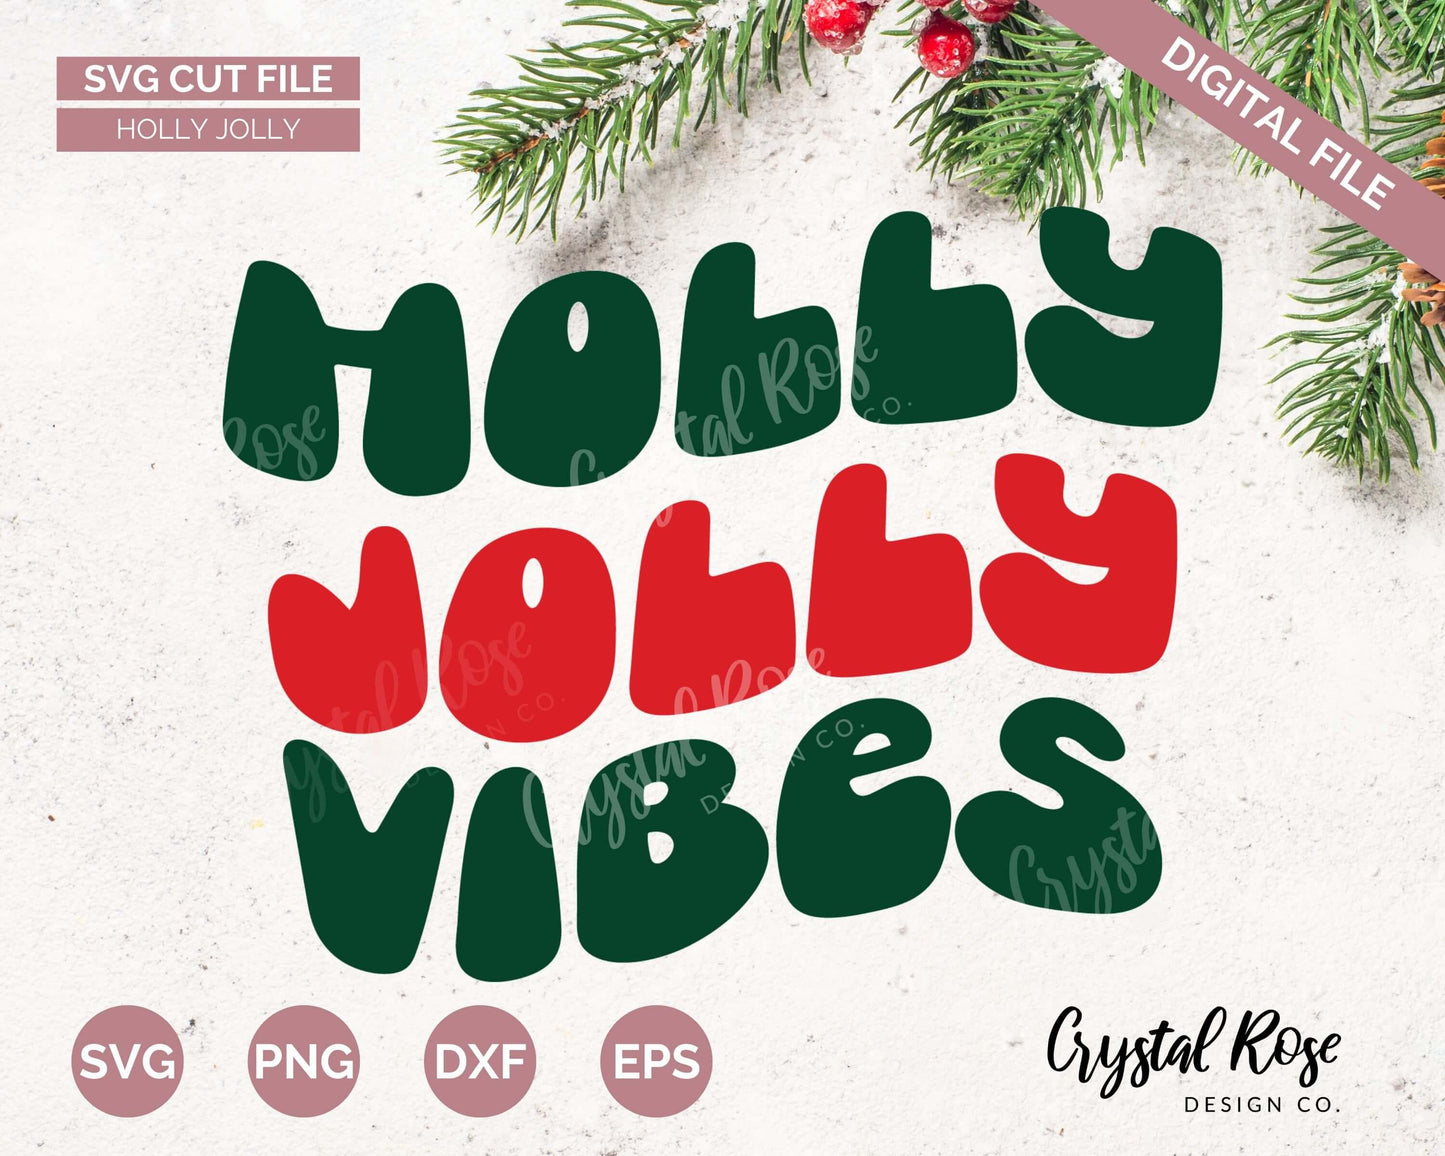 Retro Holly Jolly Vibes SVG, Digital Download, Cricut, Silhouette, Glowforge (includes svg/png/dxf/eps)